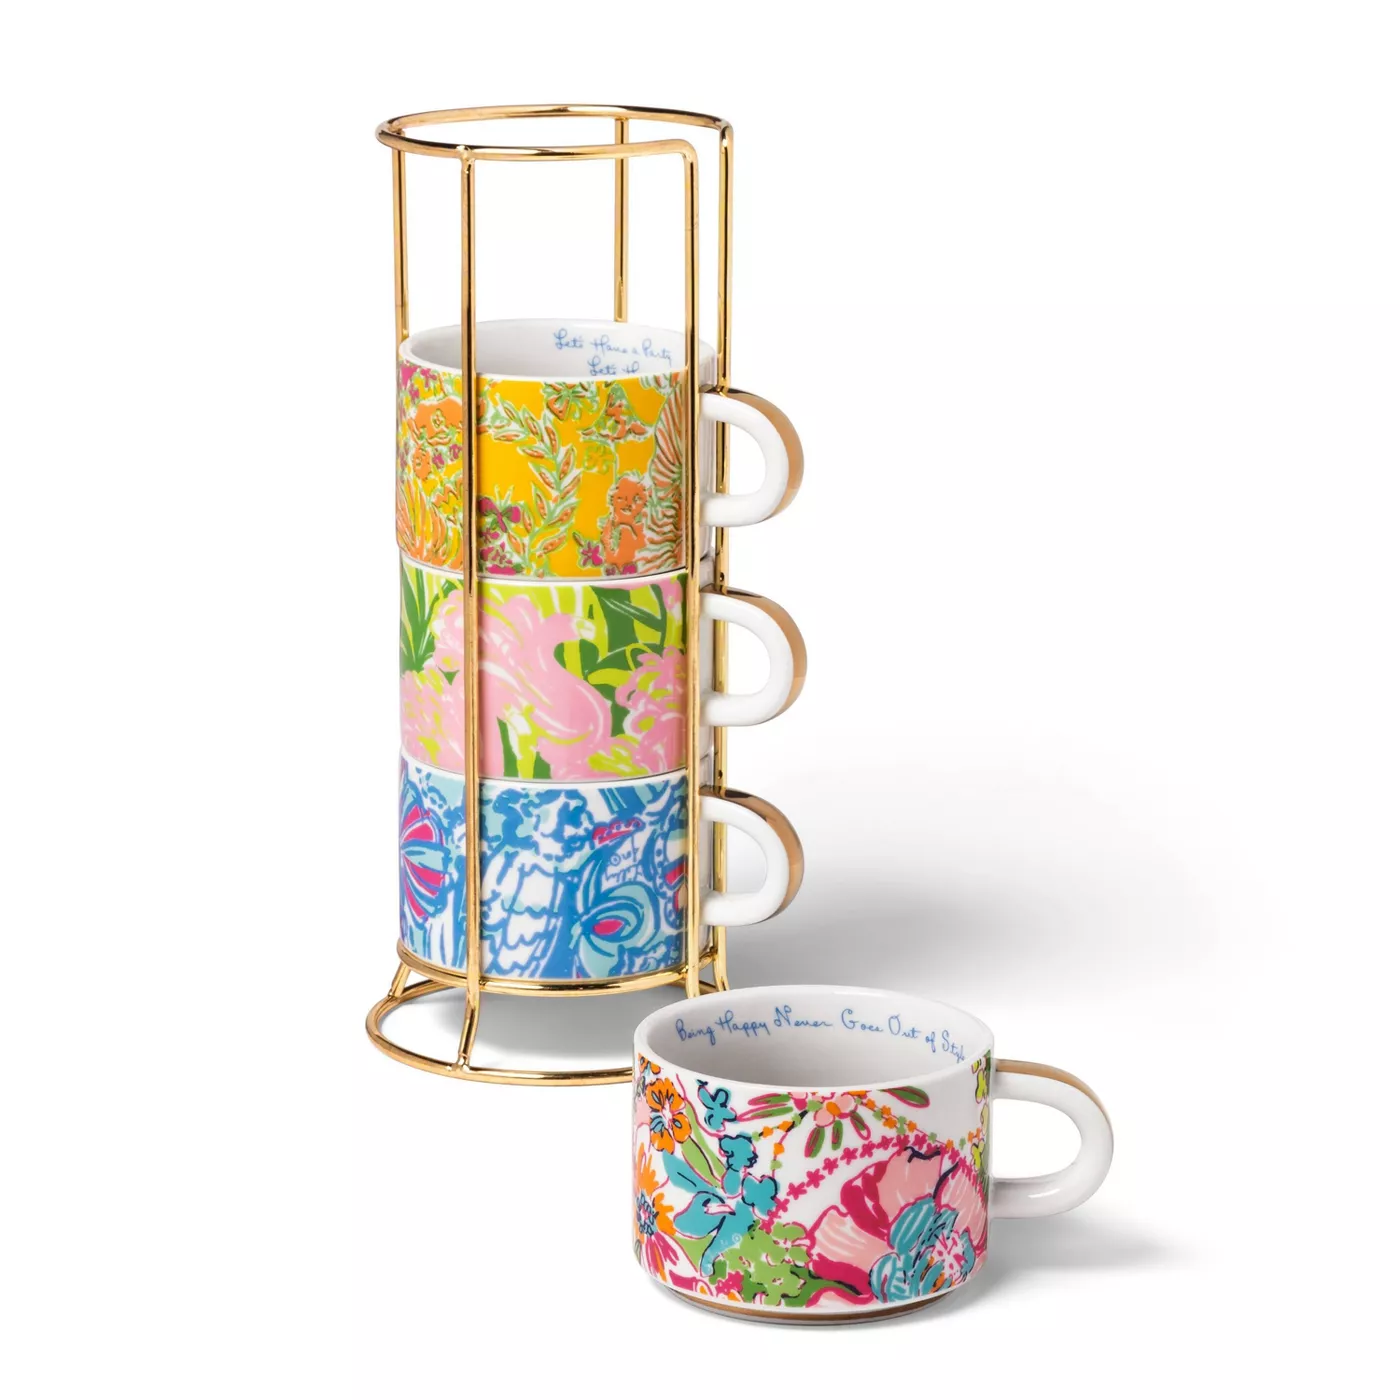 5pc 8.8oz Porcelain Stacking Espresso Mugs with Stand - Lilly Pulitzer for Target - image 1 of 2